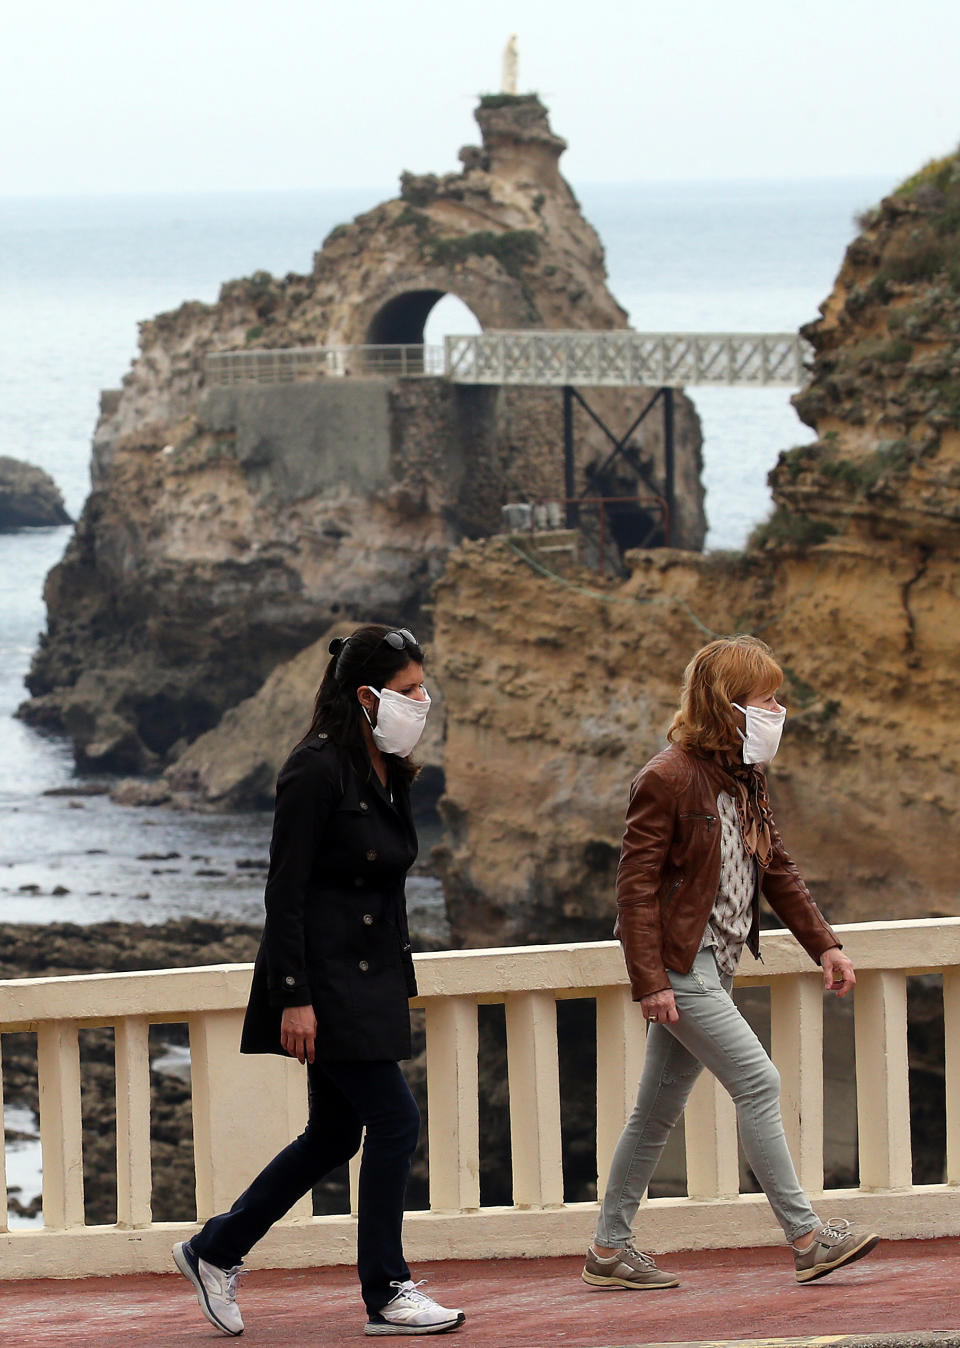 People wearing face masks walk during a nationwide confinement to counter the COVID-19, in Biarritz, southwestern France, Saturday April 11, 2020. The new coronavirus causes mild or moderate symptoms for most people, but for some, especially older adults and people with existing health problems, it can cause more severe illness or death. (AP Photo/Bob Edme)